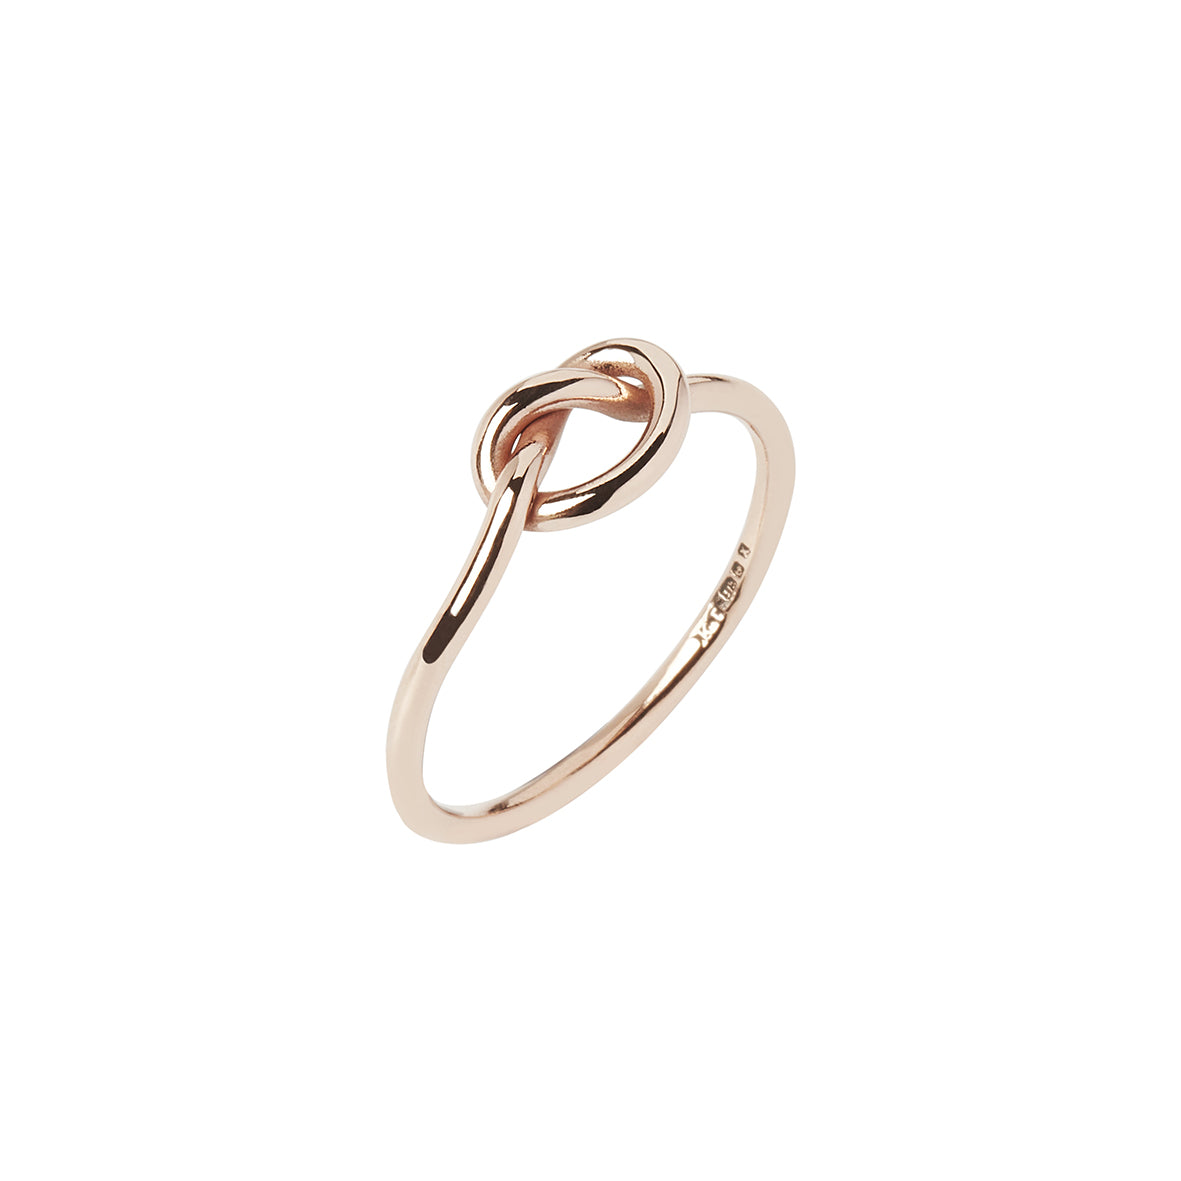 9ct rose gold proposal love knot ring on white background. Handcrafted promise ring made in Corbridge, Northumberland by Kirsty Taylor Goldsmiths